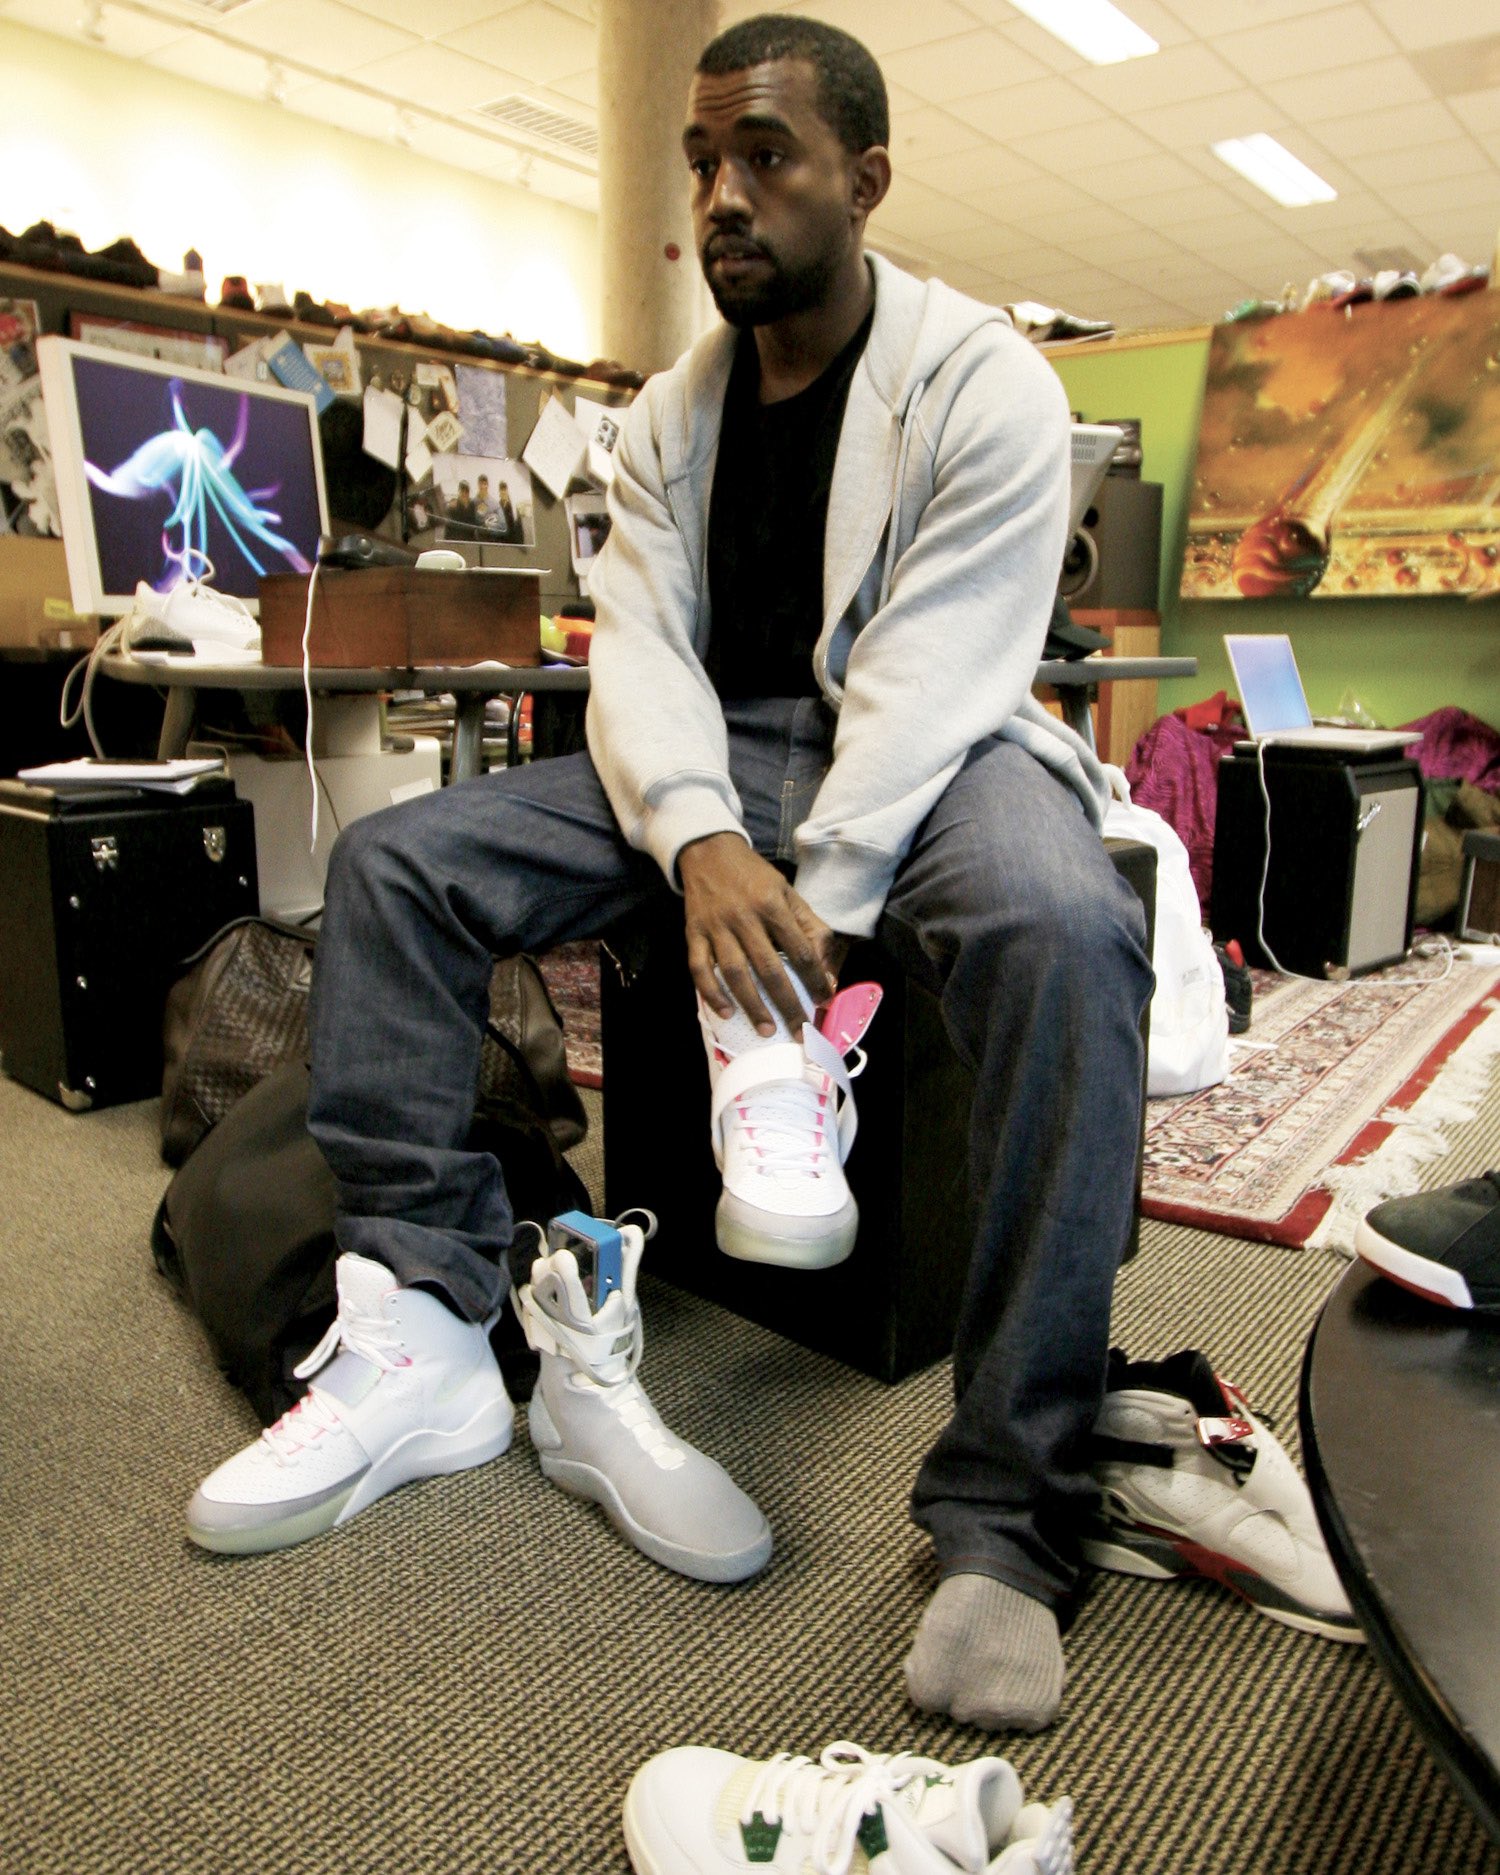 Nick DePaula on Twitter: "The Yeezy process... Went down memory lane pulled up some old 2007-2009 photos of Kanye working on his first Nike Air Yeezy prototypes —&gt; https://t.co/n35jSQnZwv https://t.co/zhVE2Tyf6s"